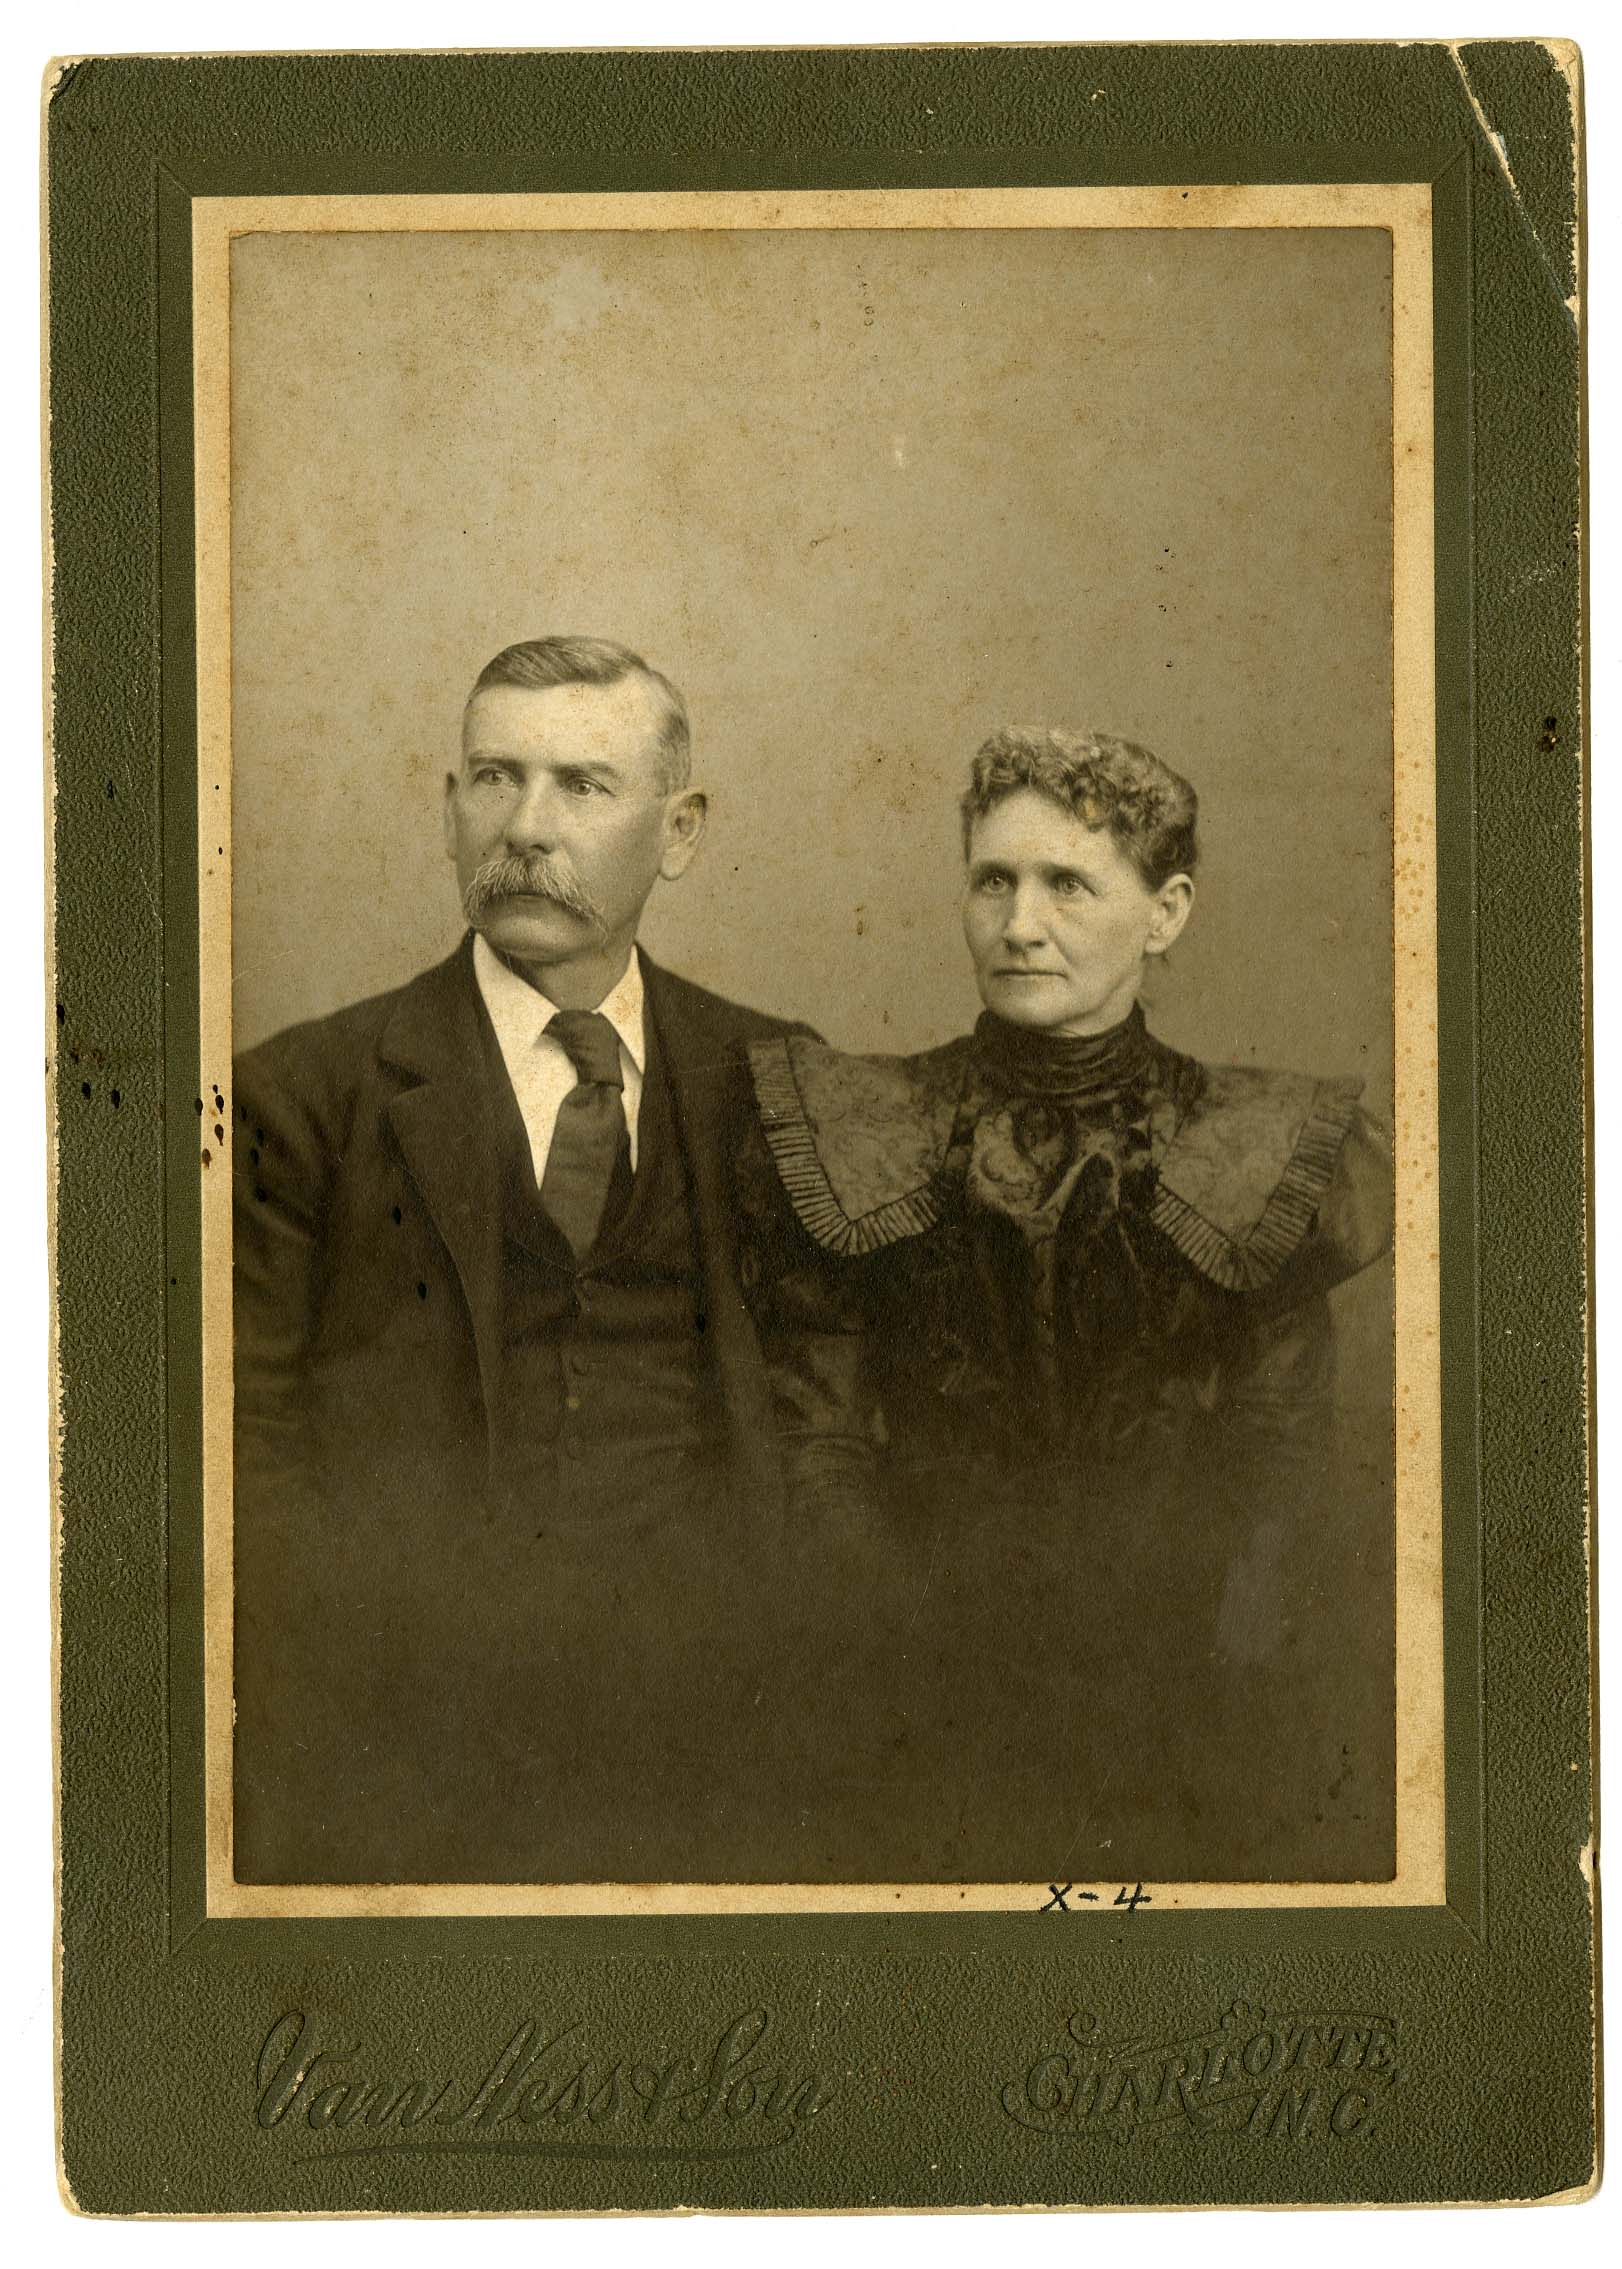 Jerome L. Wood and Ann Beard Wood, May 21st, 1898 - Courtesy of the Creed Collection WU Pettus Archives, 2024